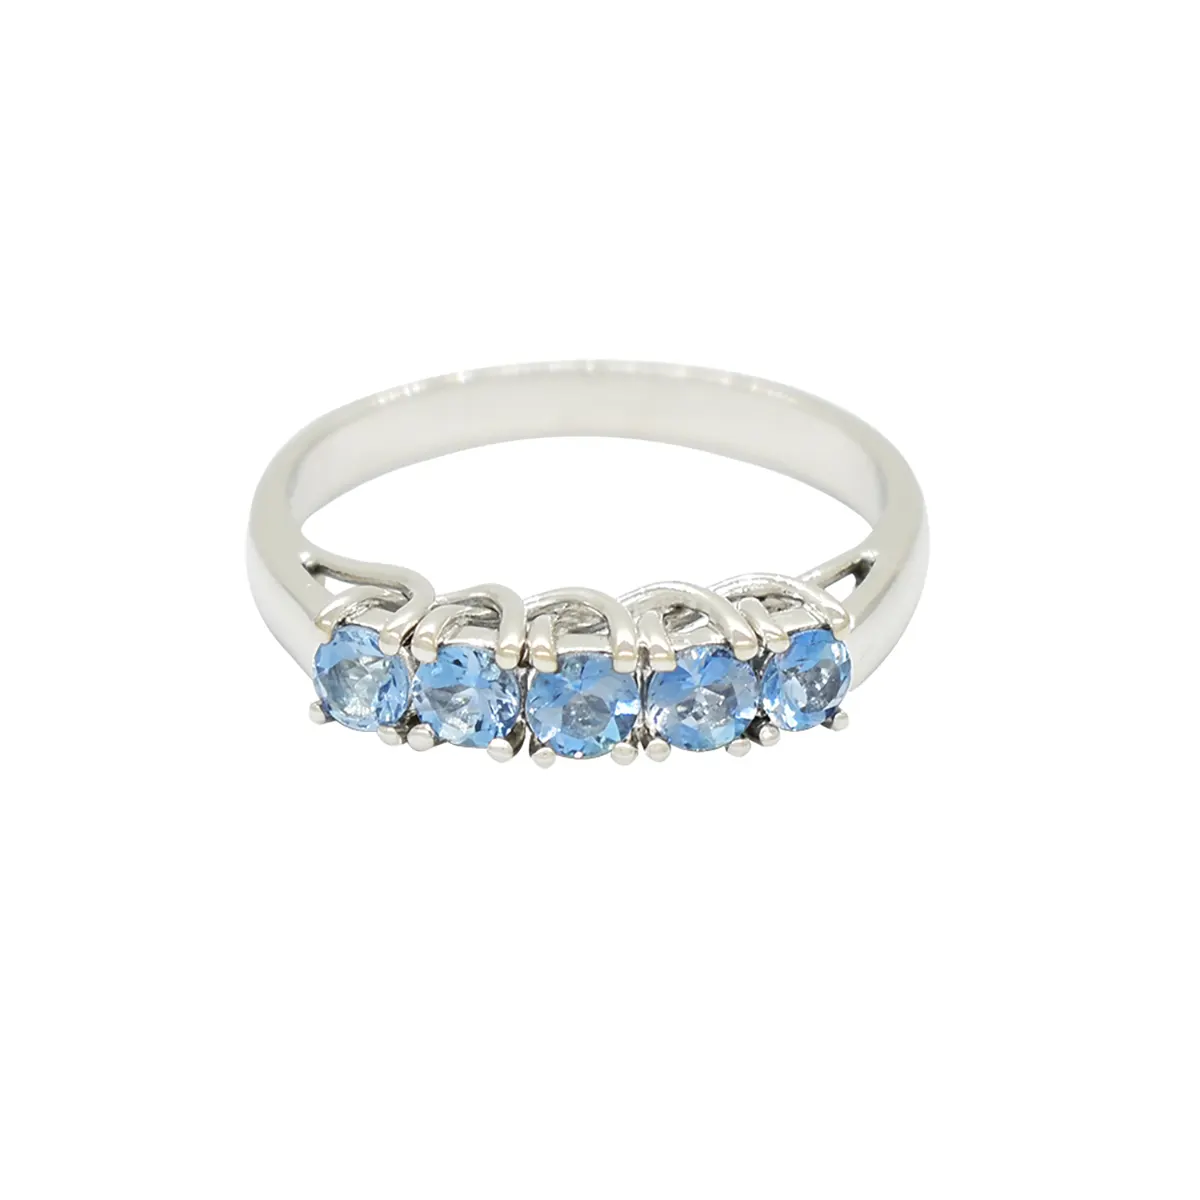 Small aquamarine wedding band ring with 0.48 Ct. t.w. in 5 round cut natural aquamarines custom made in 18K white gold